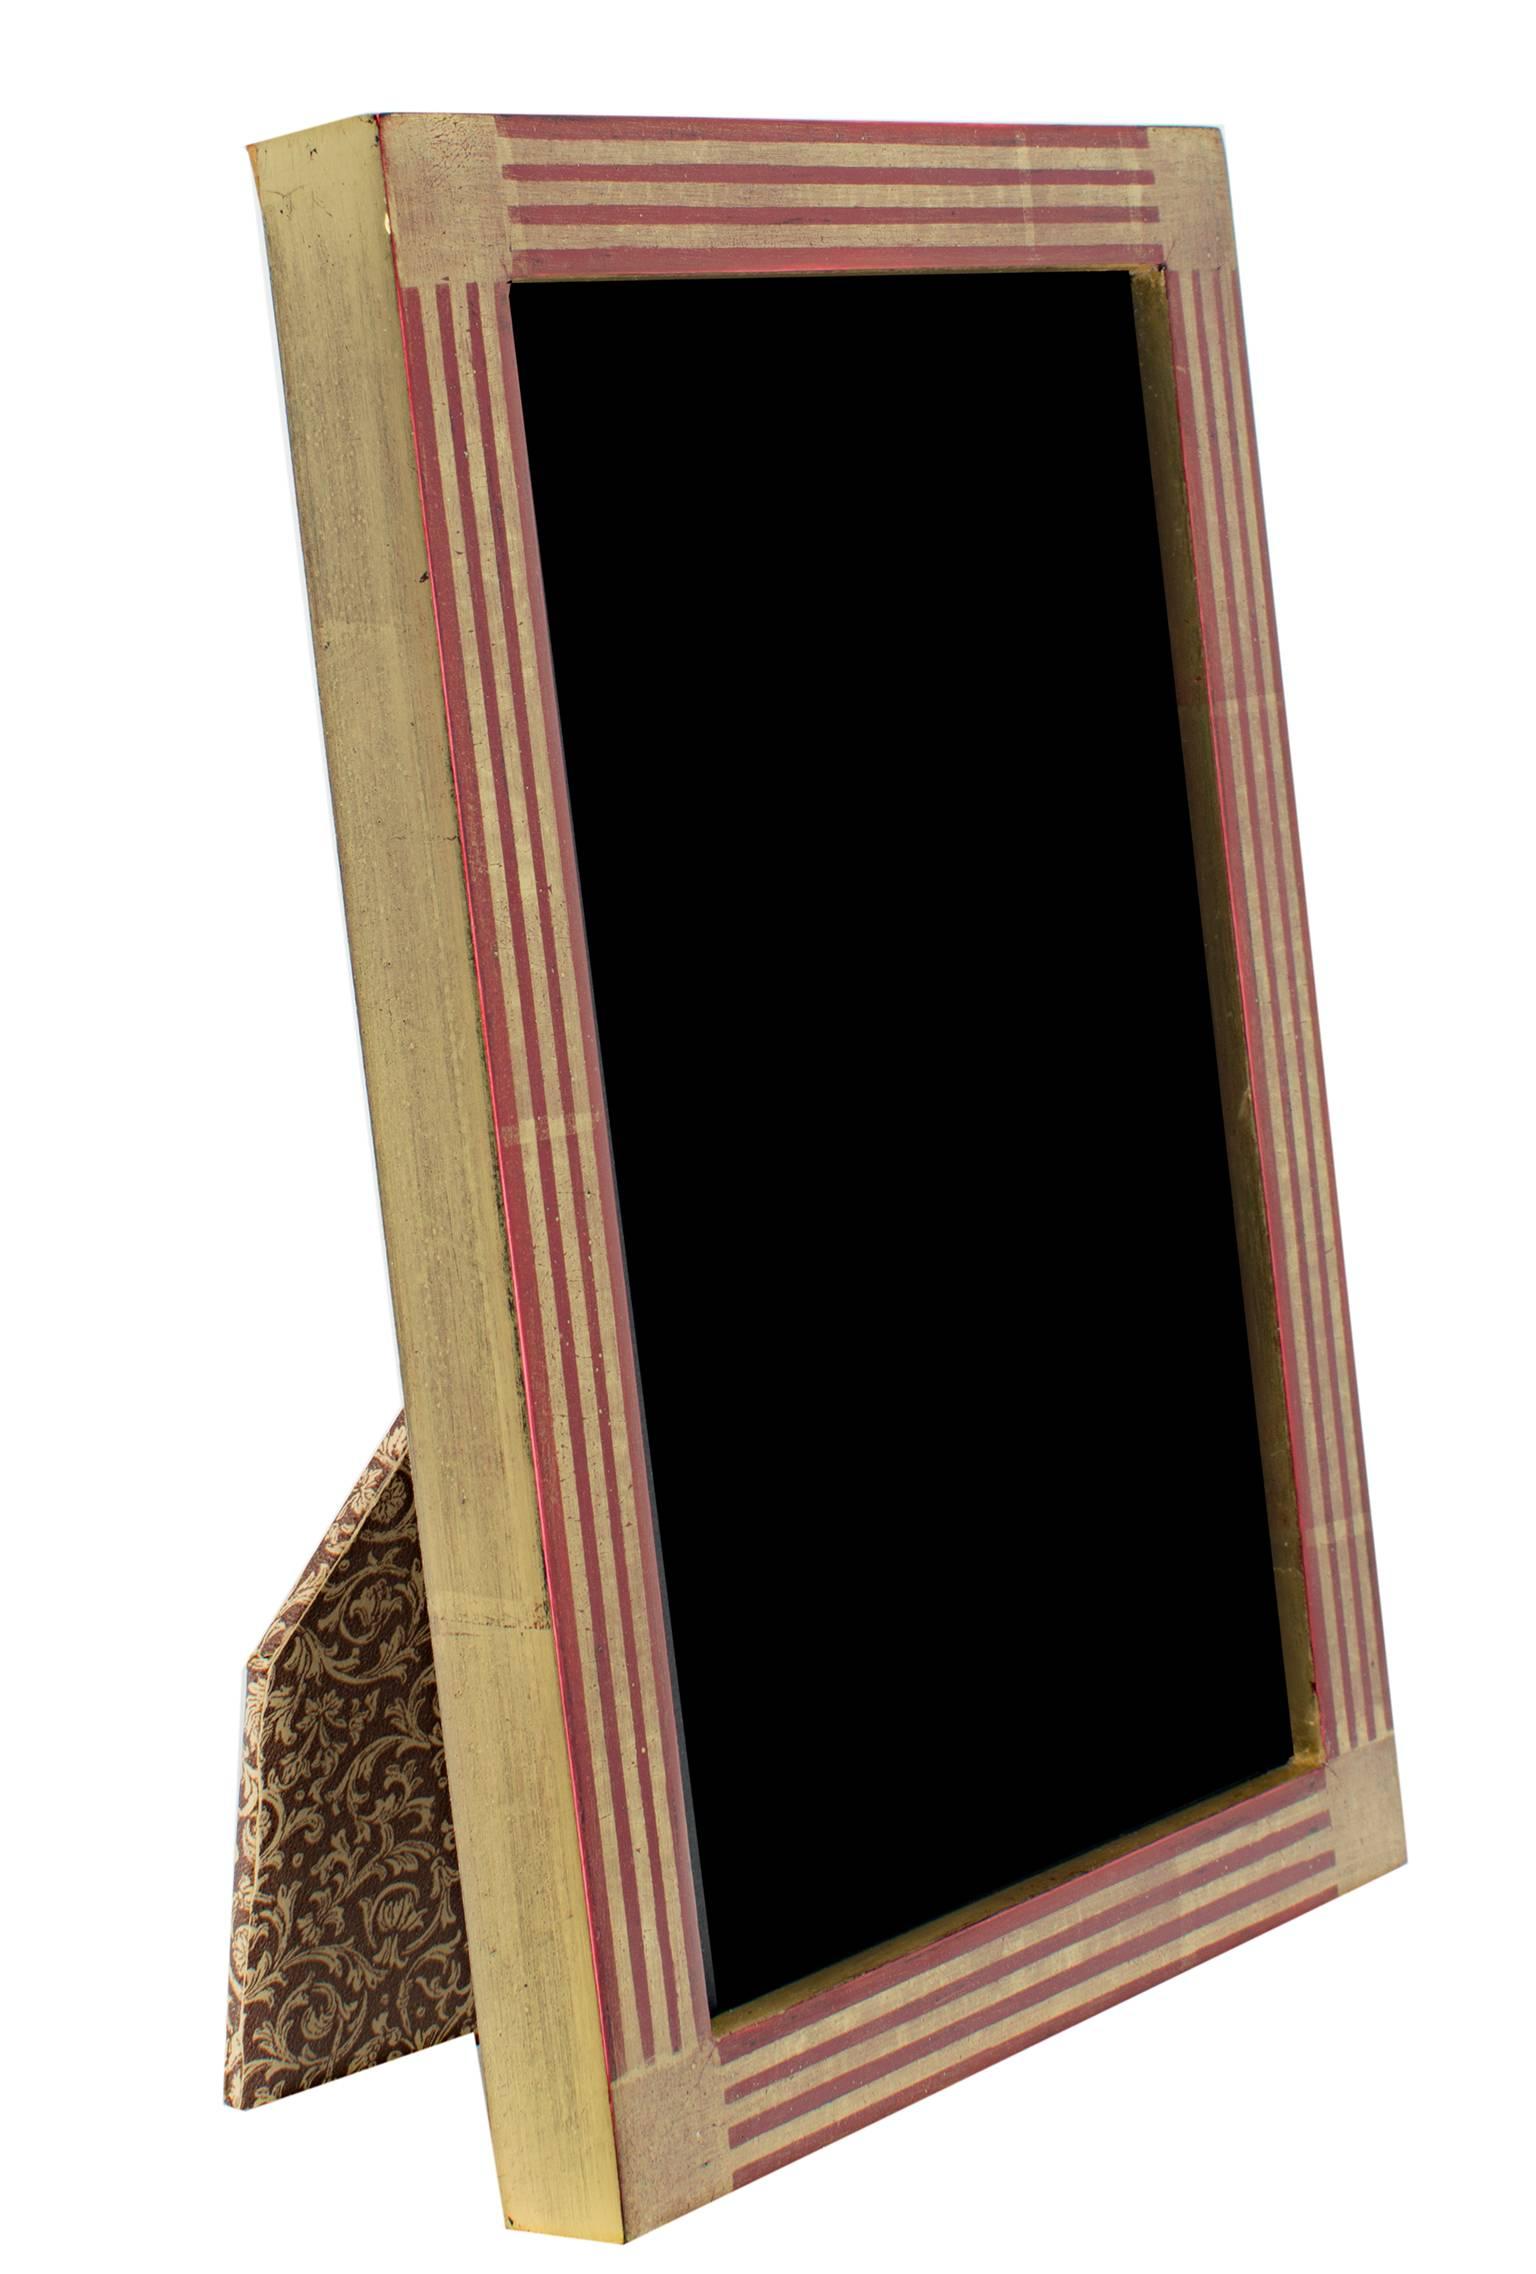 "Handmade 22K Gold Leaf Photo Frame, " Wood 4 x 6 in from Romania in 2011 - Art by Unknown